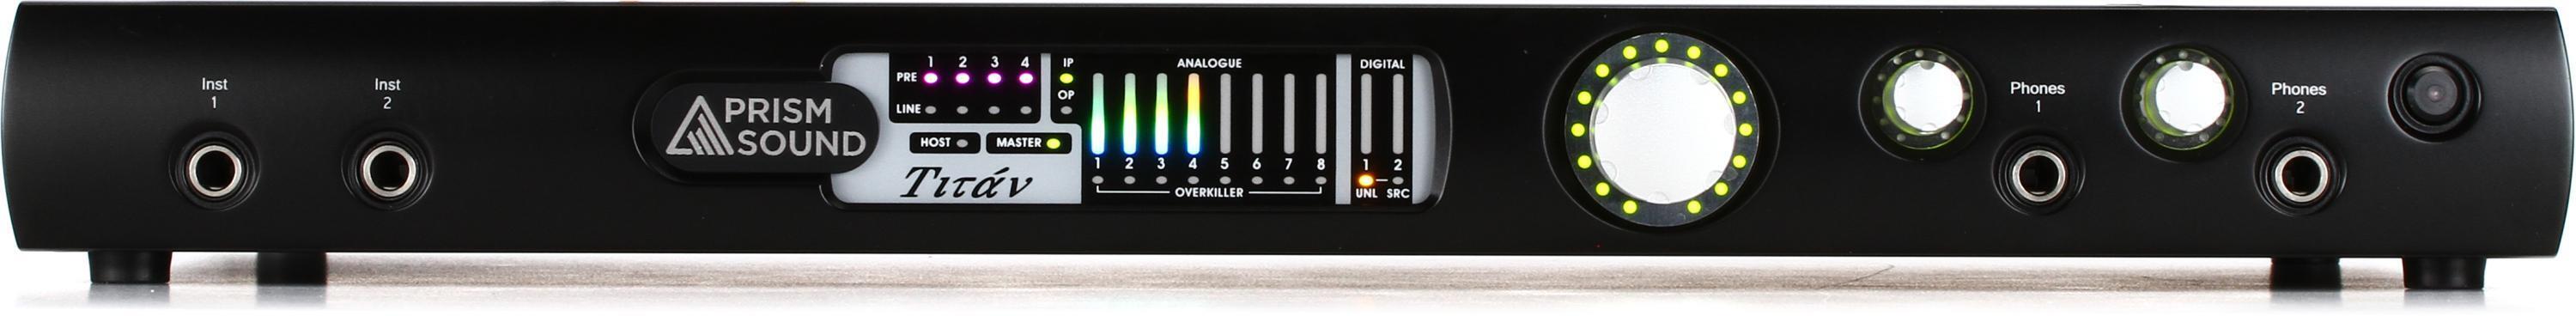 Prism Sound Titan 8-channel AD Converter | Sweetwater